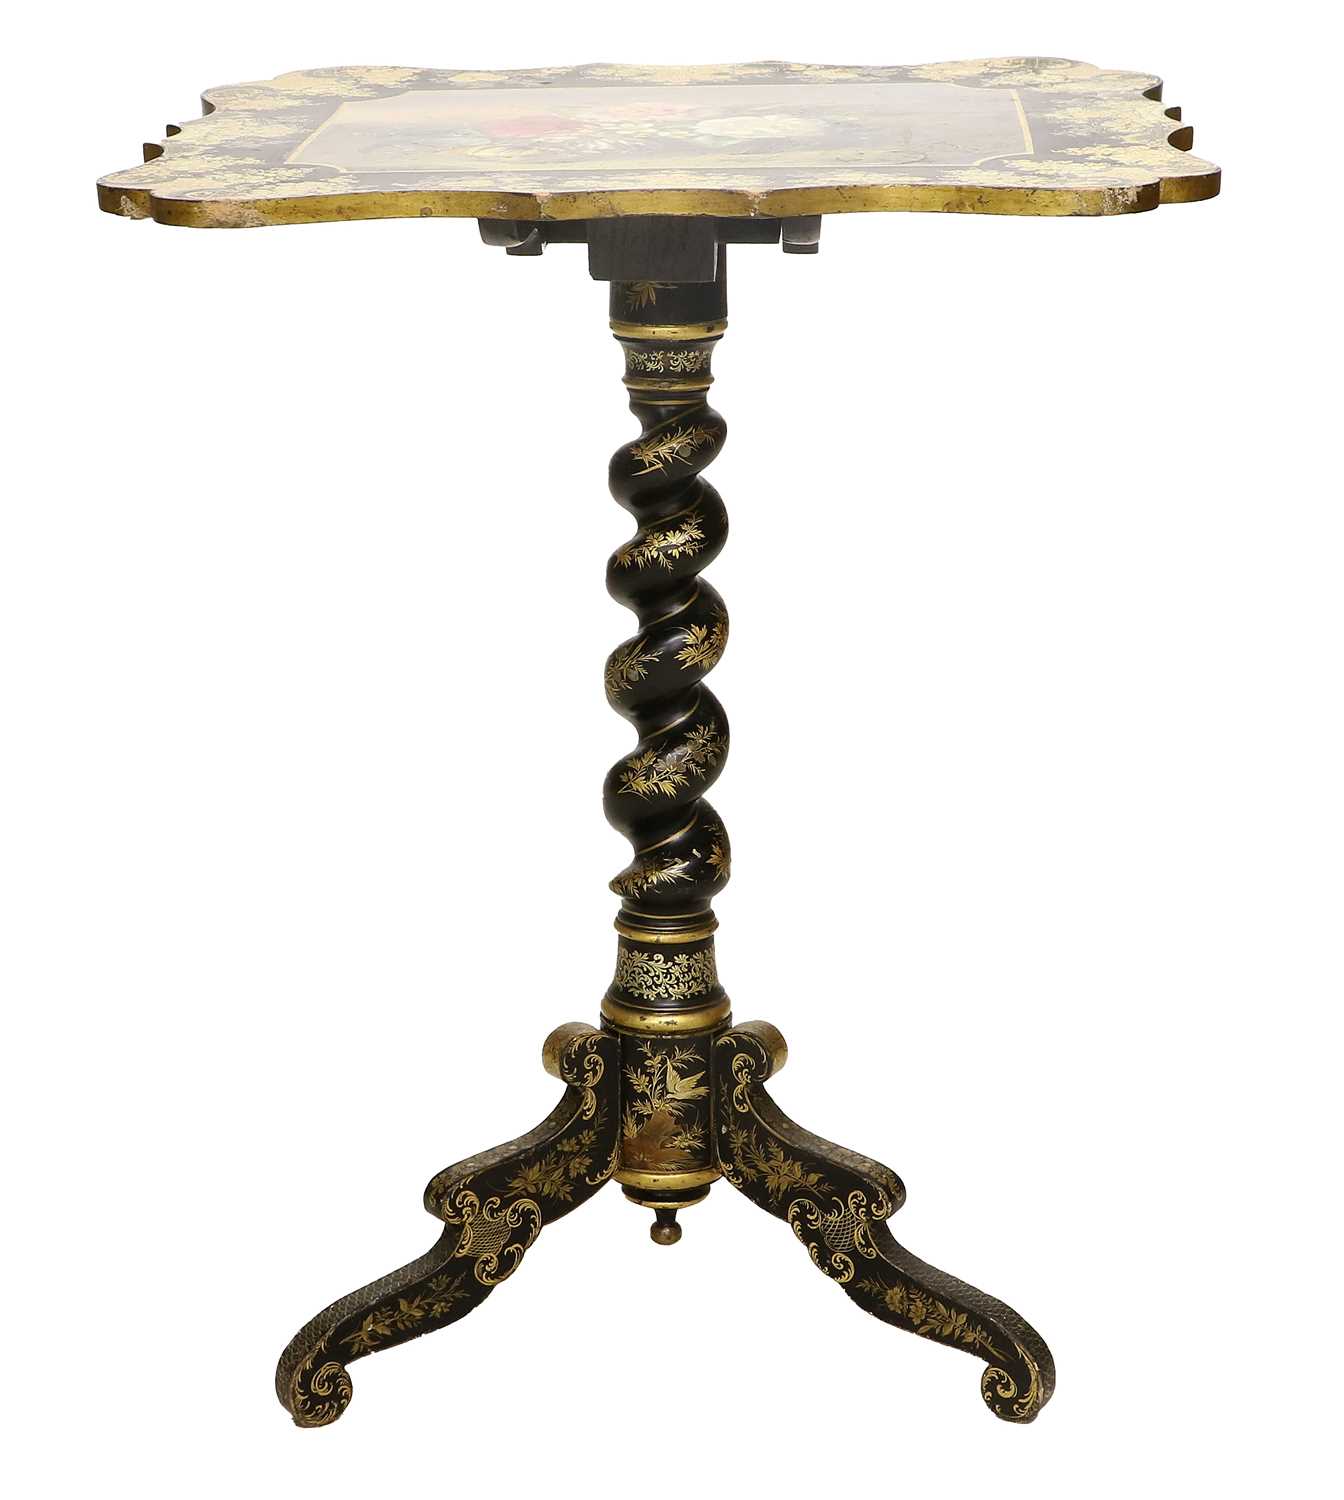 A Victorian Ebonised, Parcel-Gilt and Floral-Painted Tripod Table, 2nd half 19th century, the - Image 2 of 11